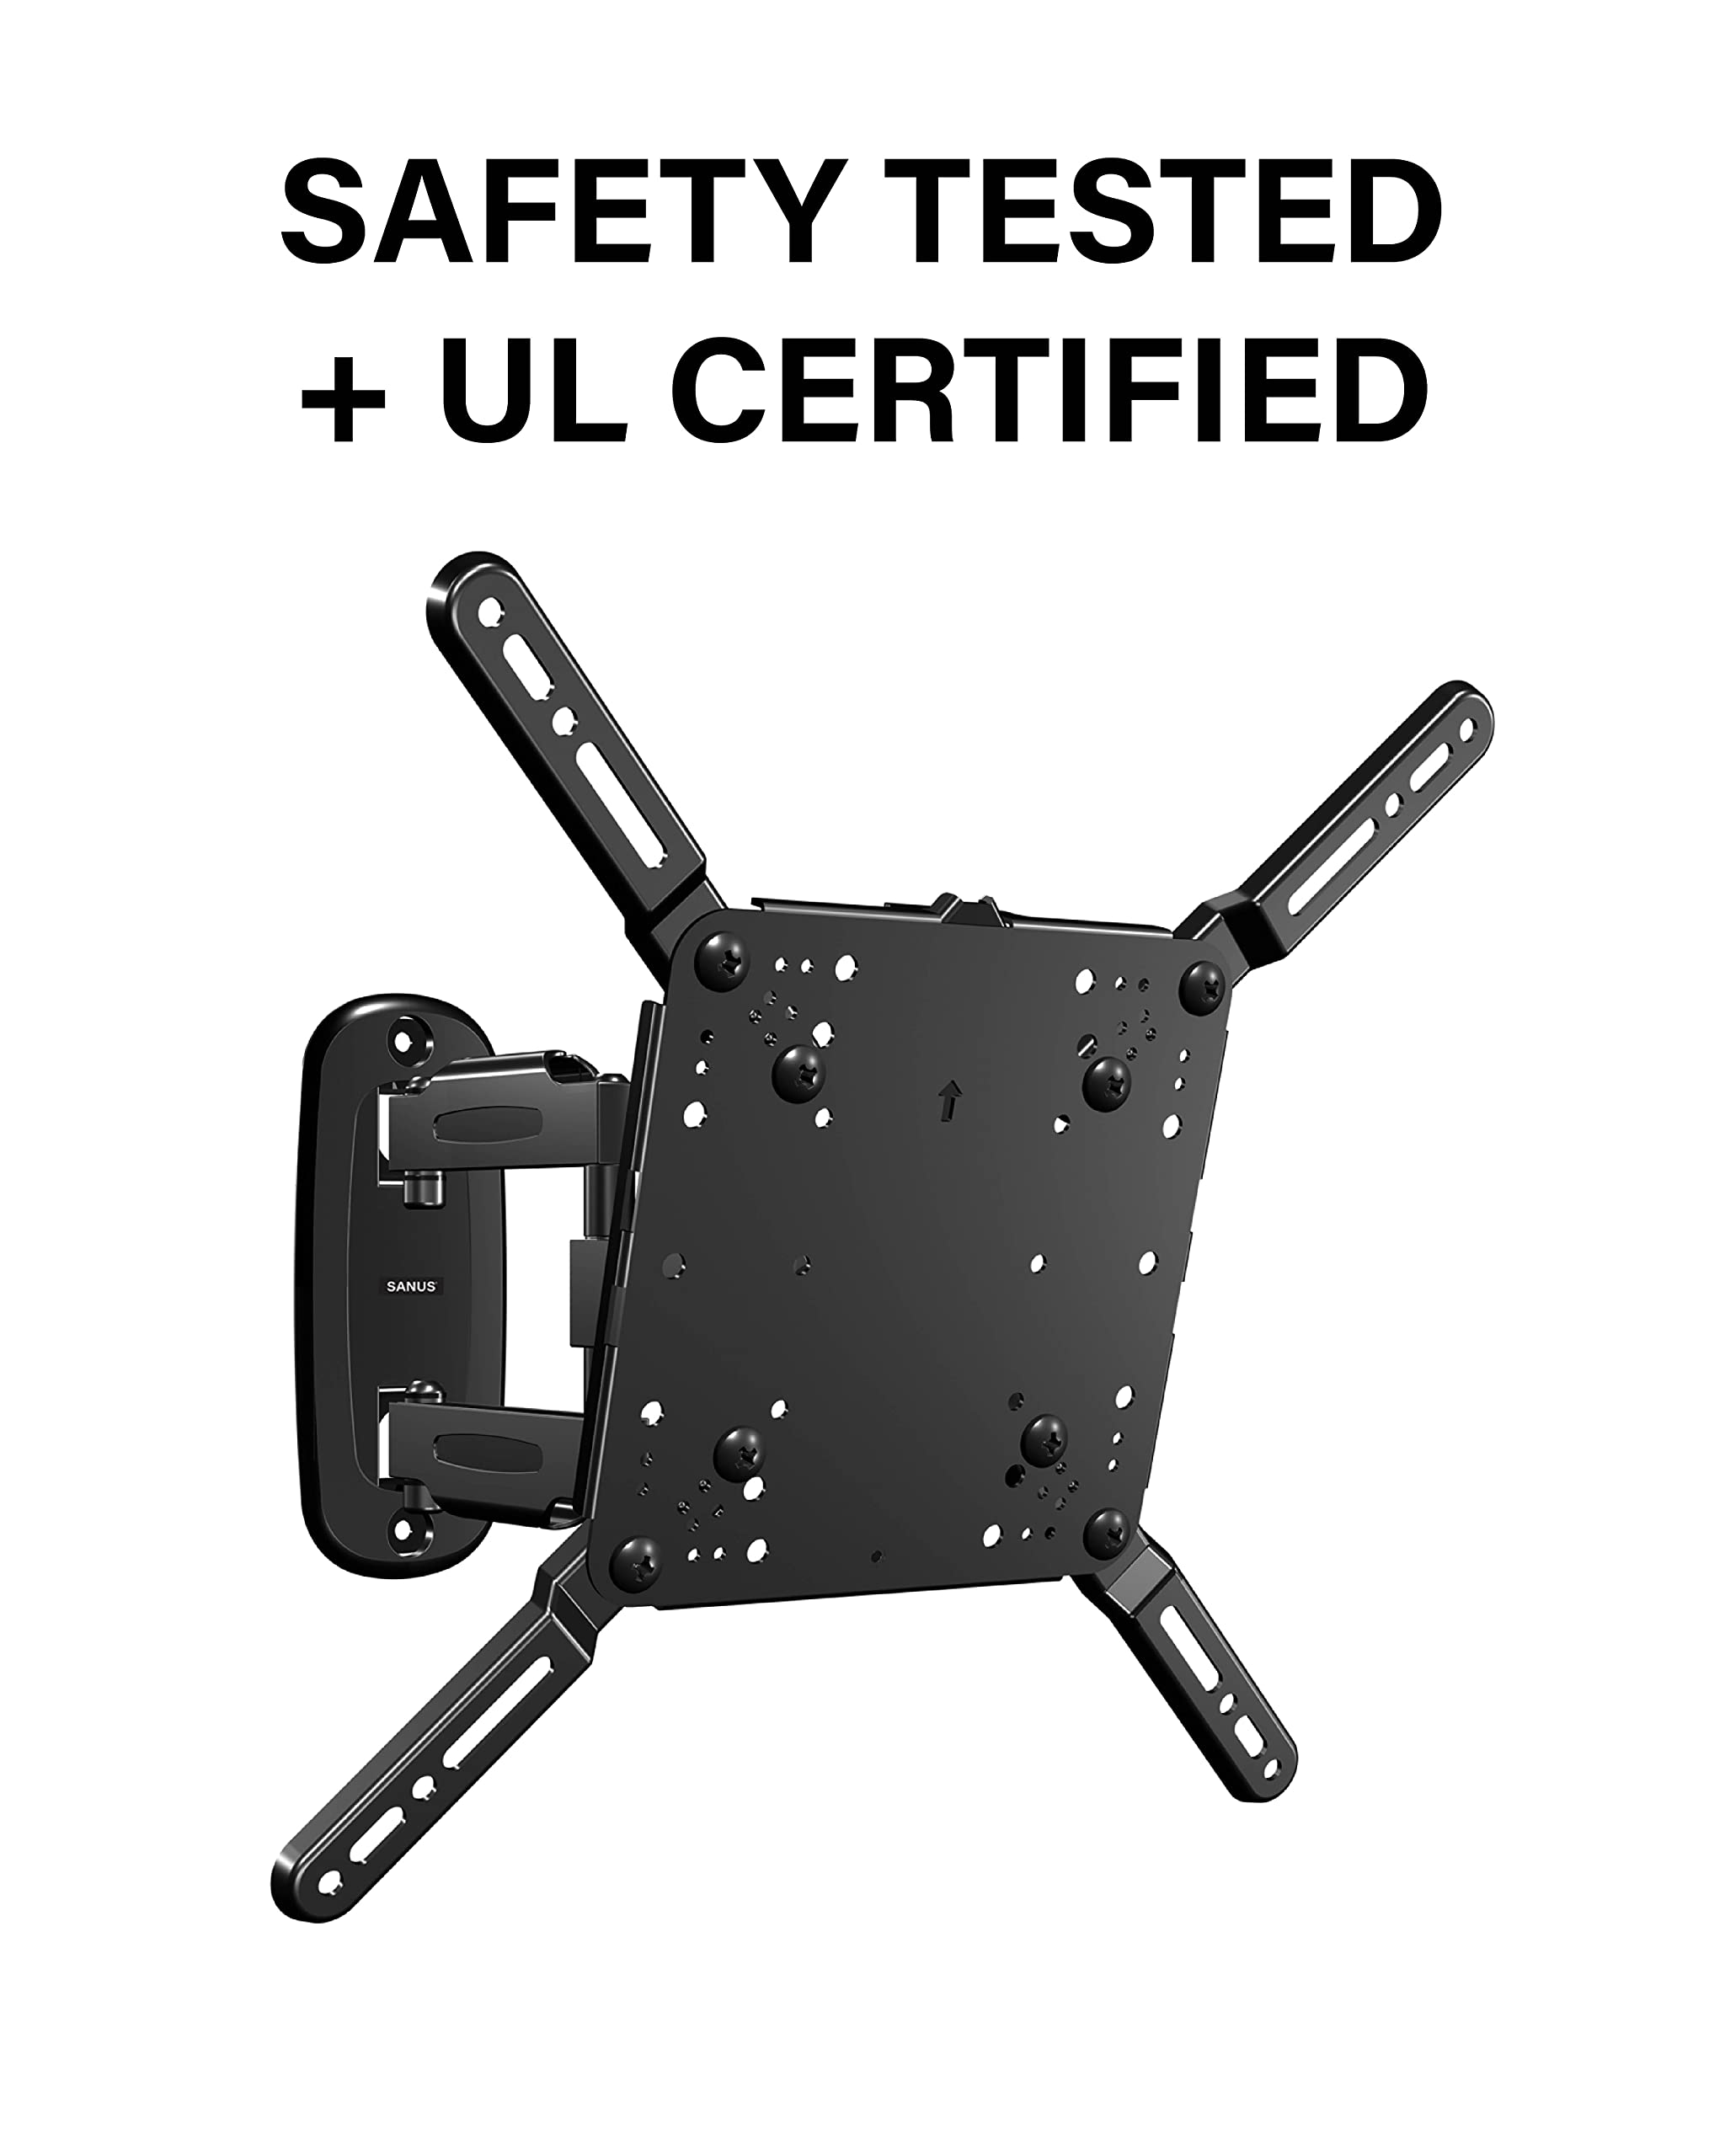 Made for Amazon Universal Full-Motion TV Wall Mount for TVs up to 55